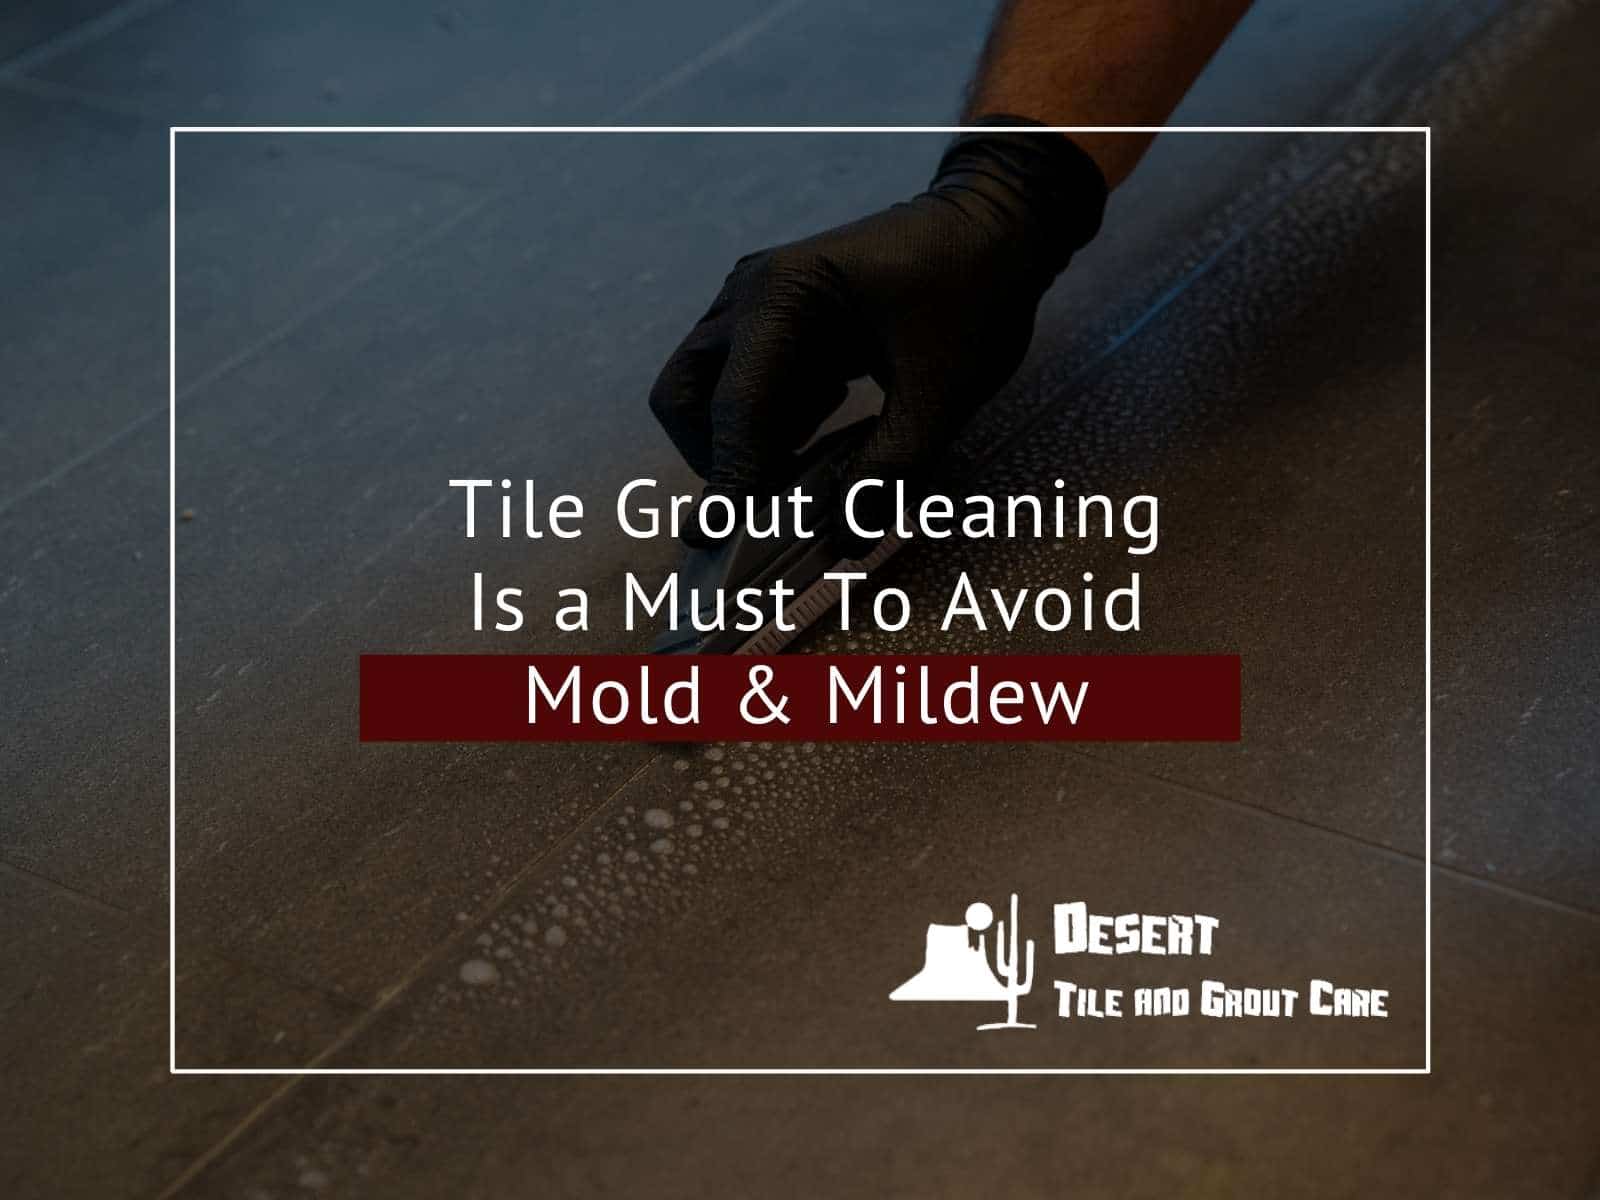 Cleaning grout mold and mildew from a house in Arizona